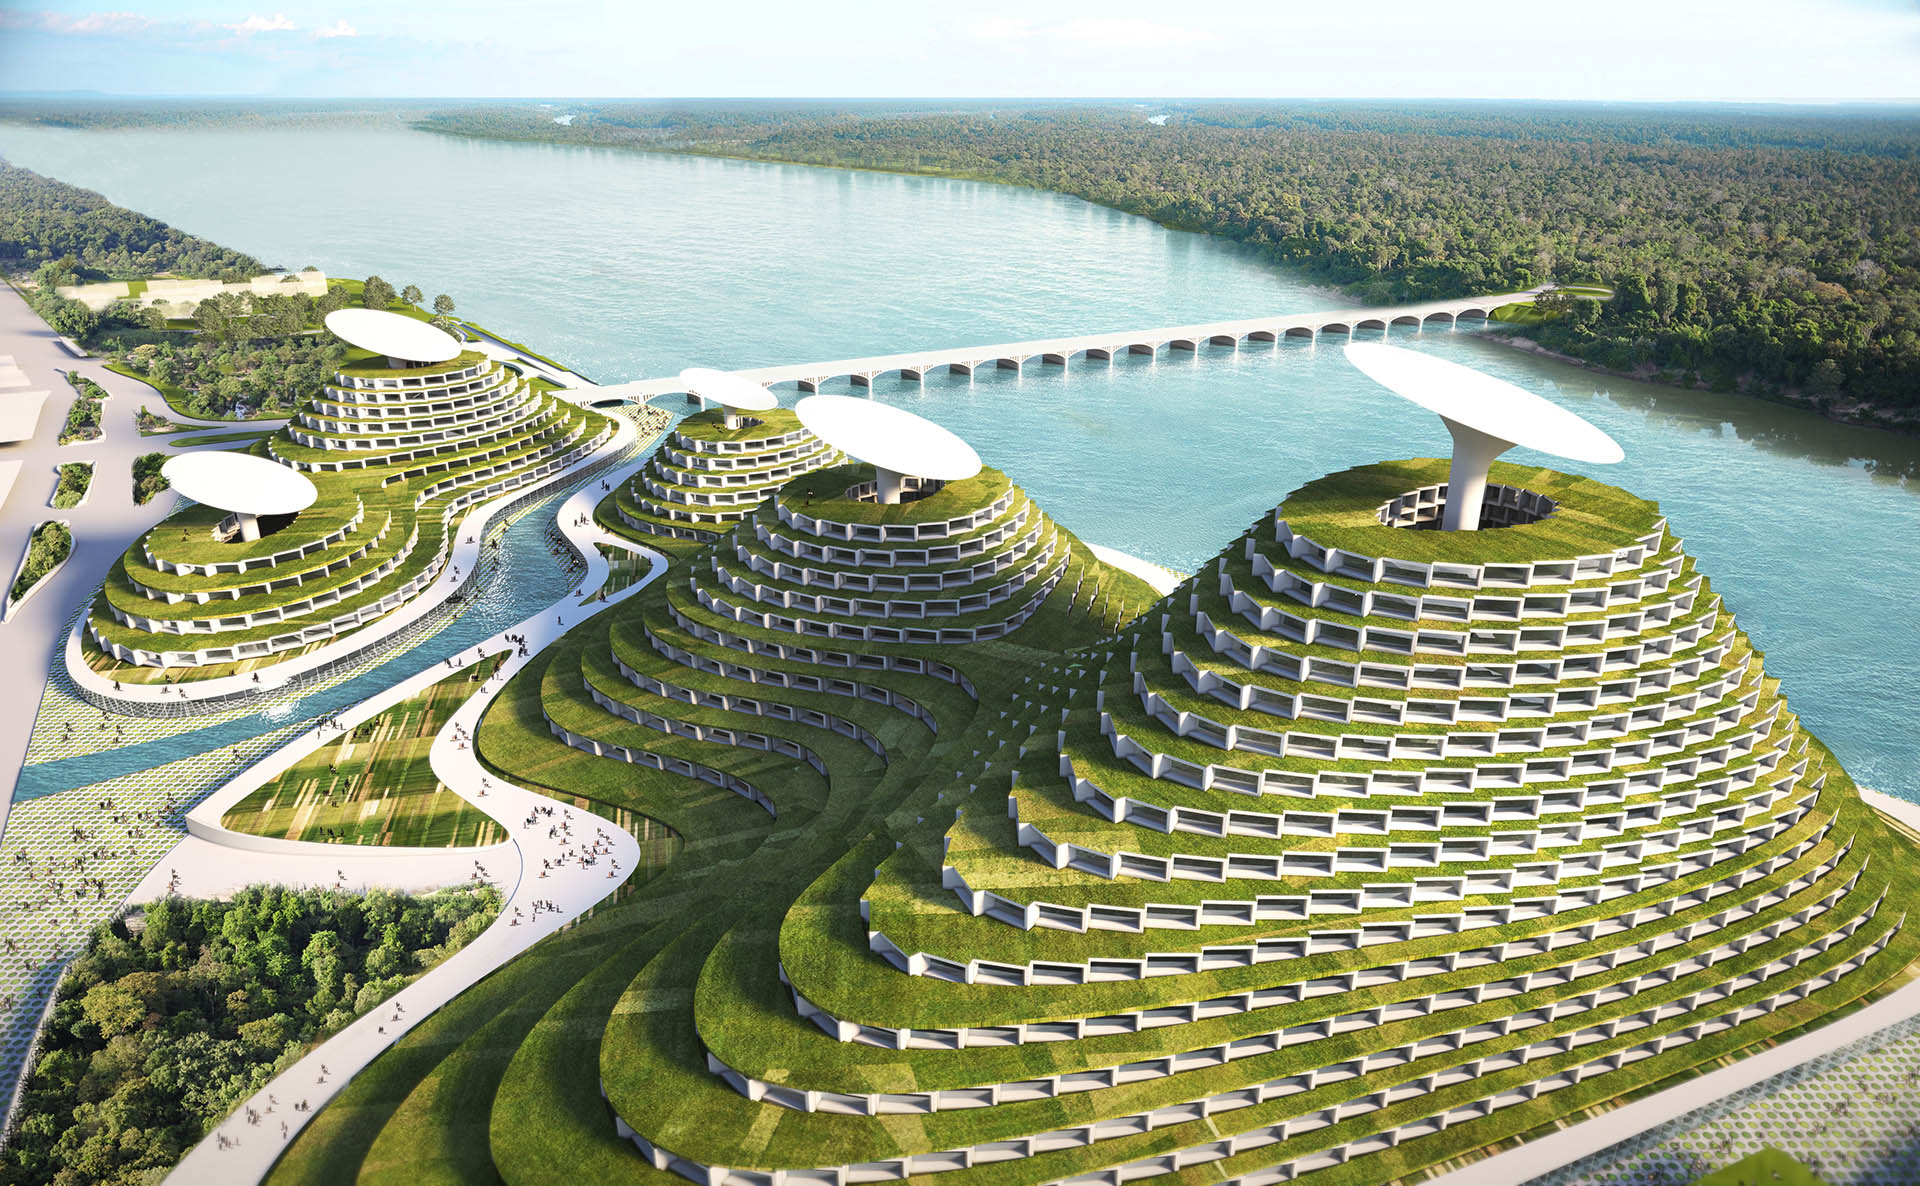 Architecture of Tomorrow: Future Cities as Imagined by Architects Today